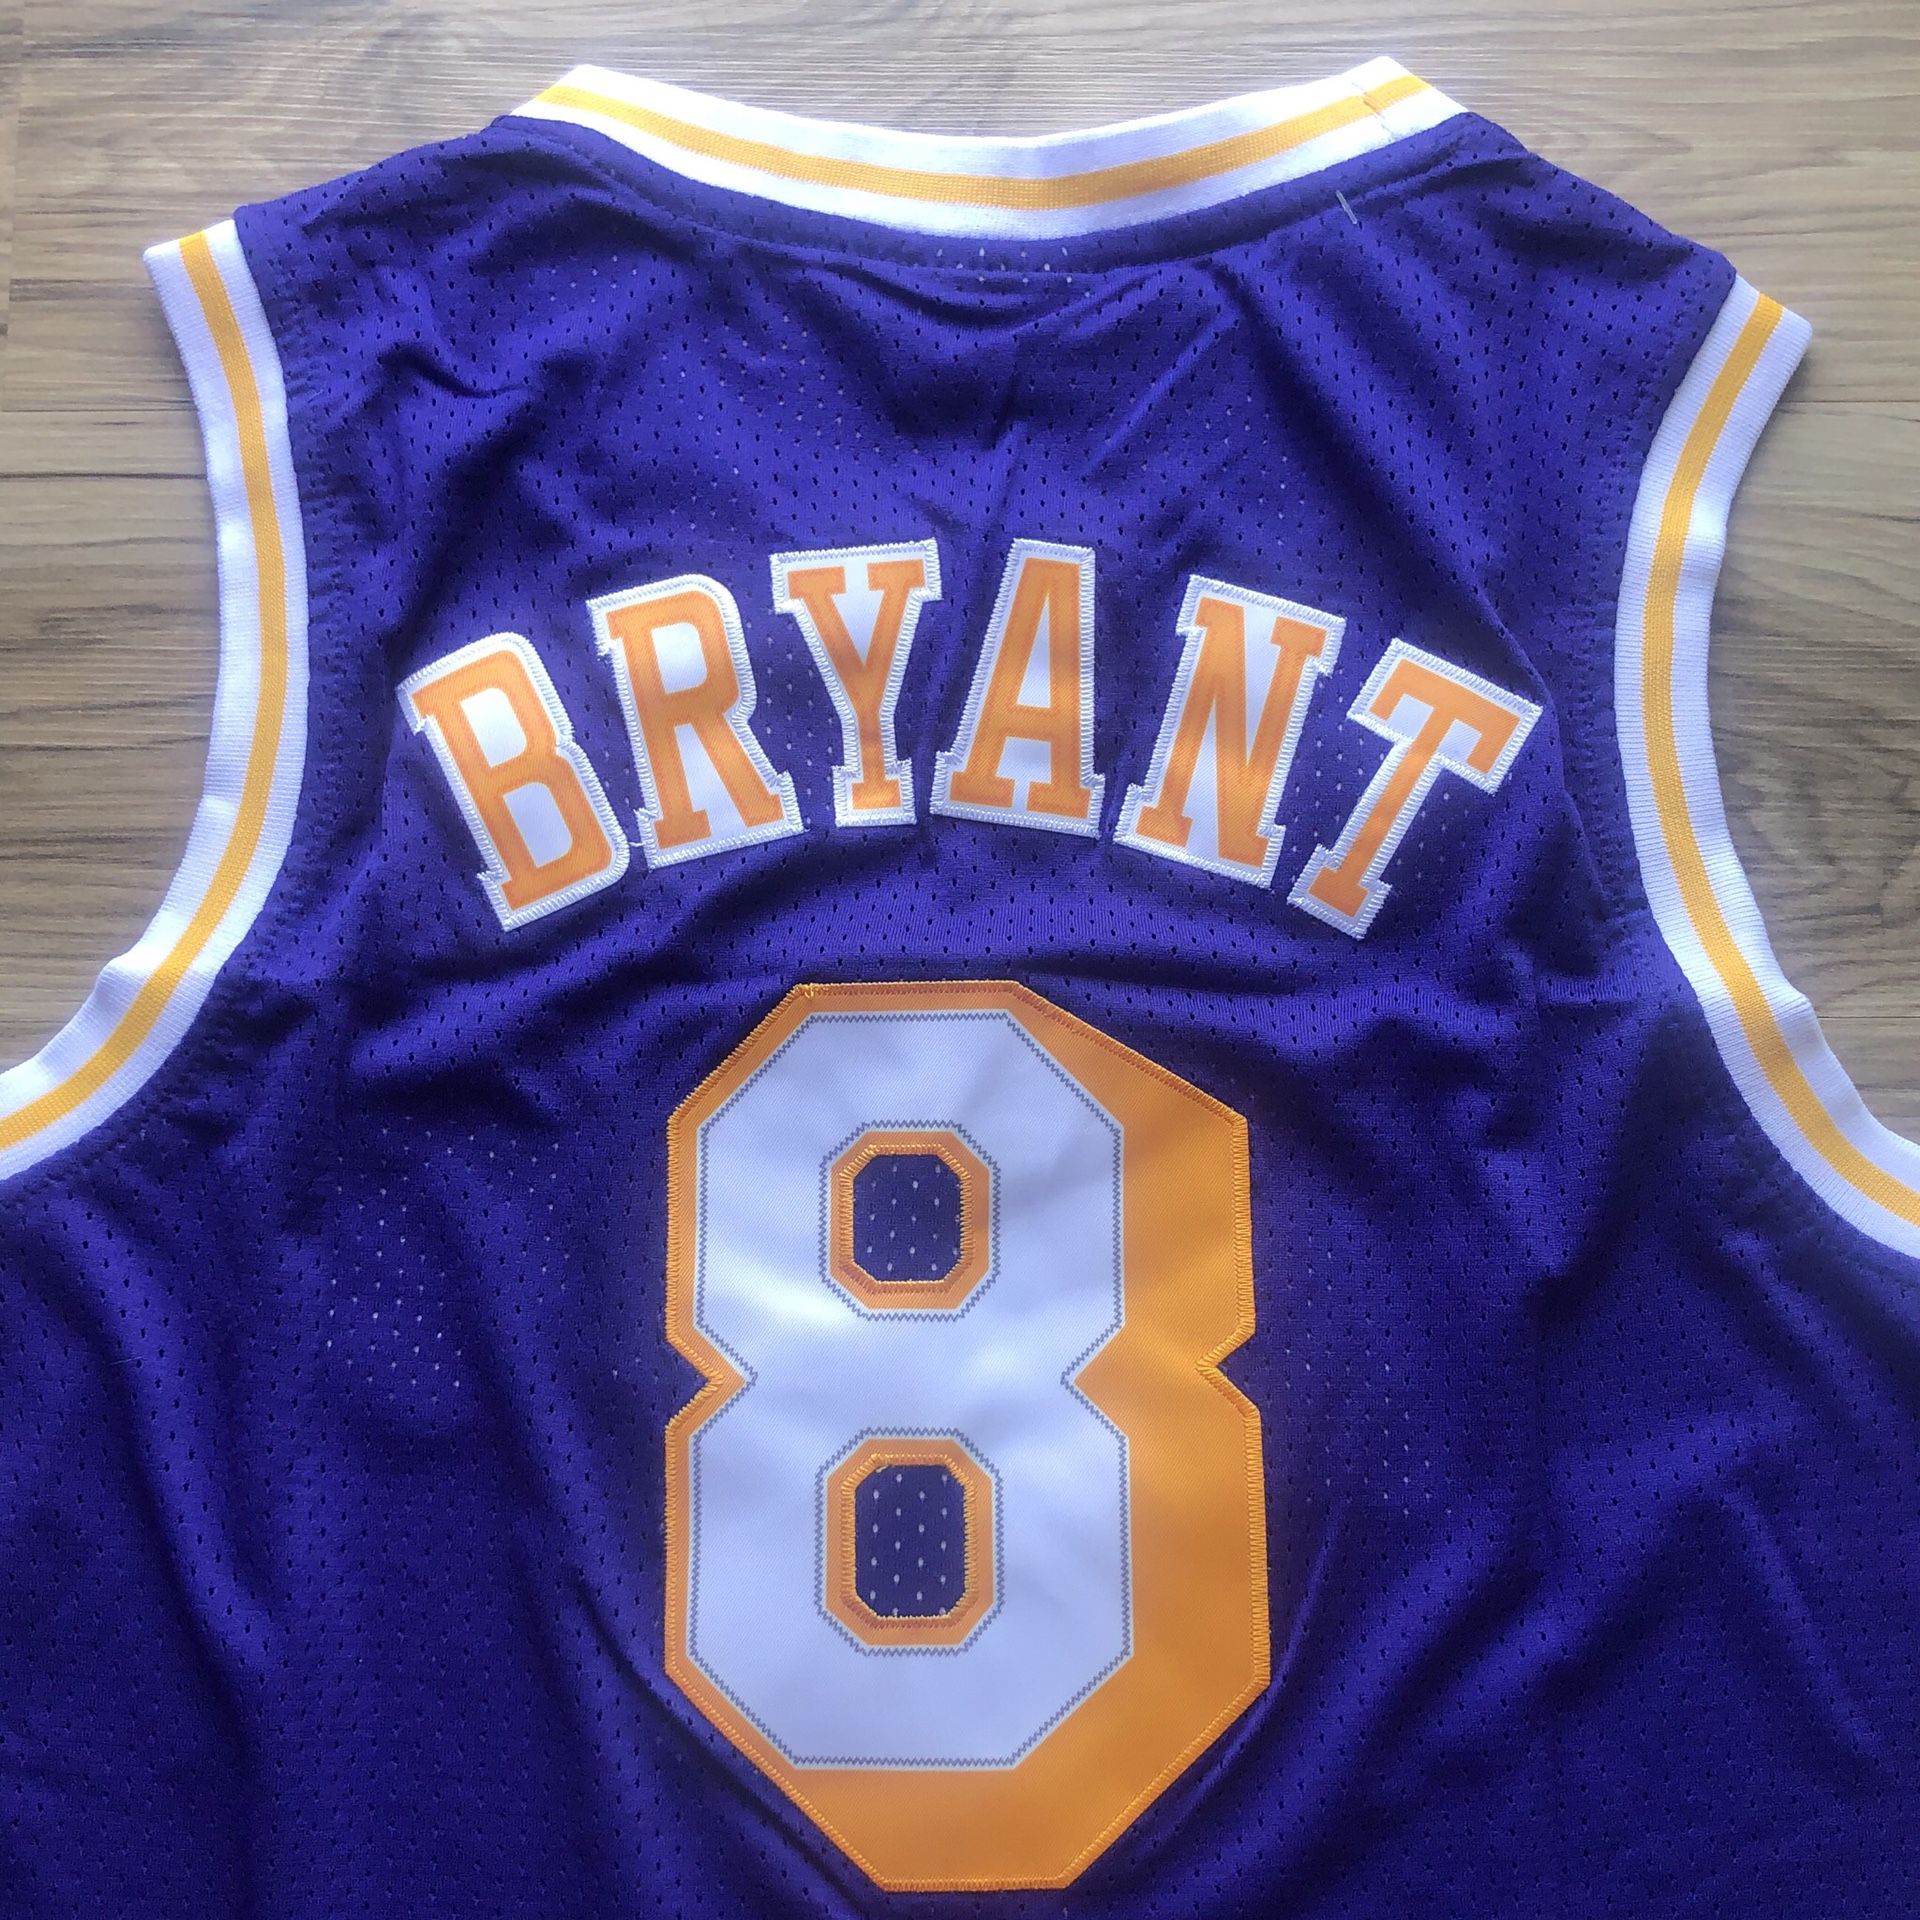 BRAND NEW! 🔥 Kobe Bryant #8 Los Angeles Lakers Jersey + SIZE LARGE or XL + SHIPS OUT TODAY! 📦💨